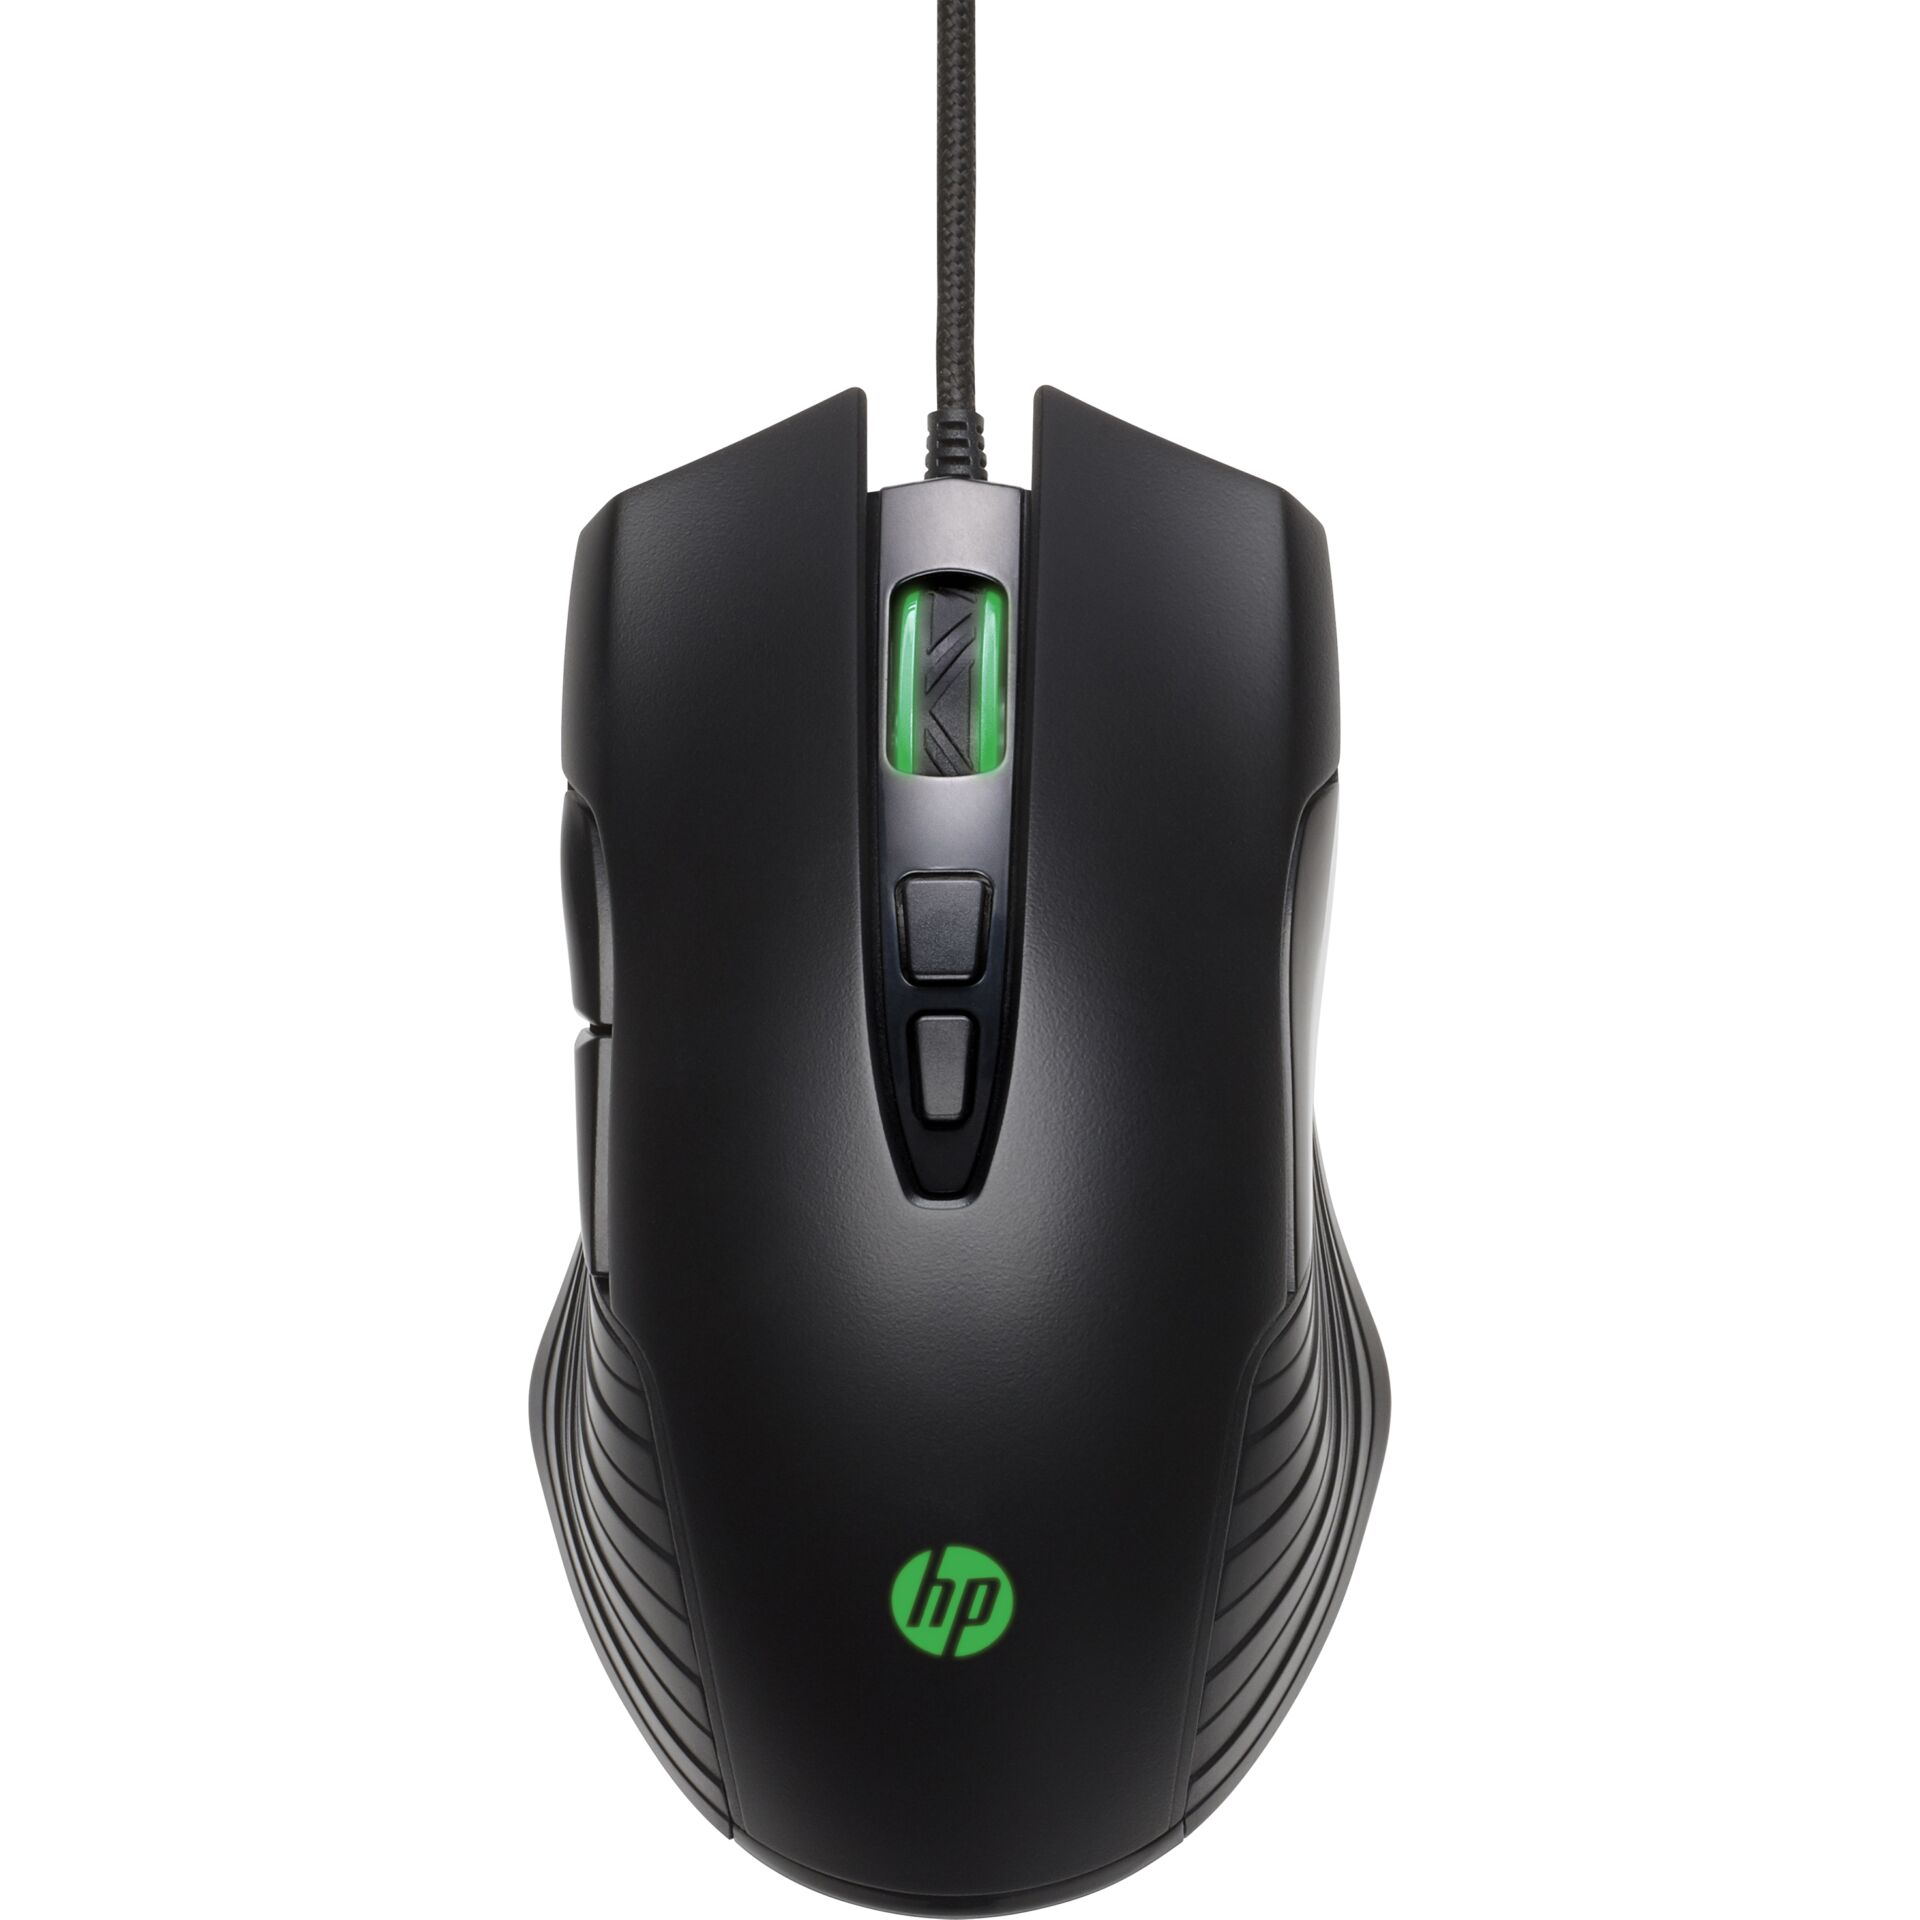 HP X220 Gaming mouse